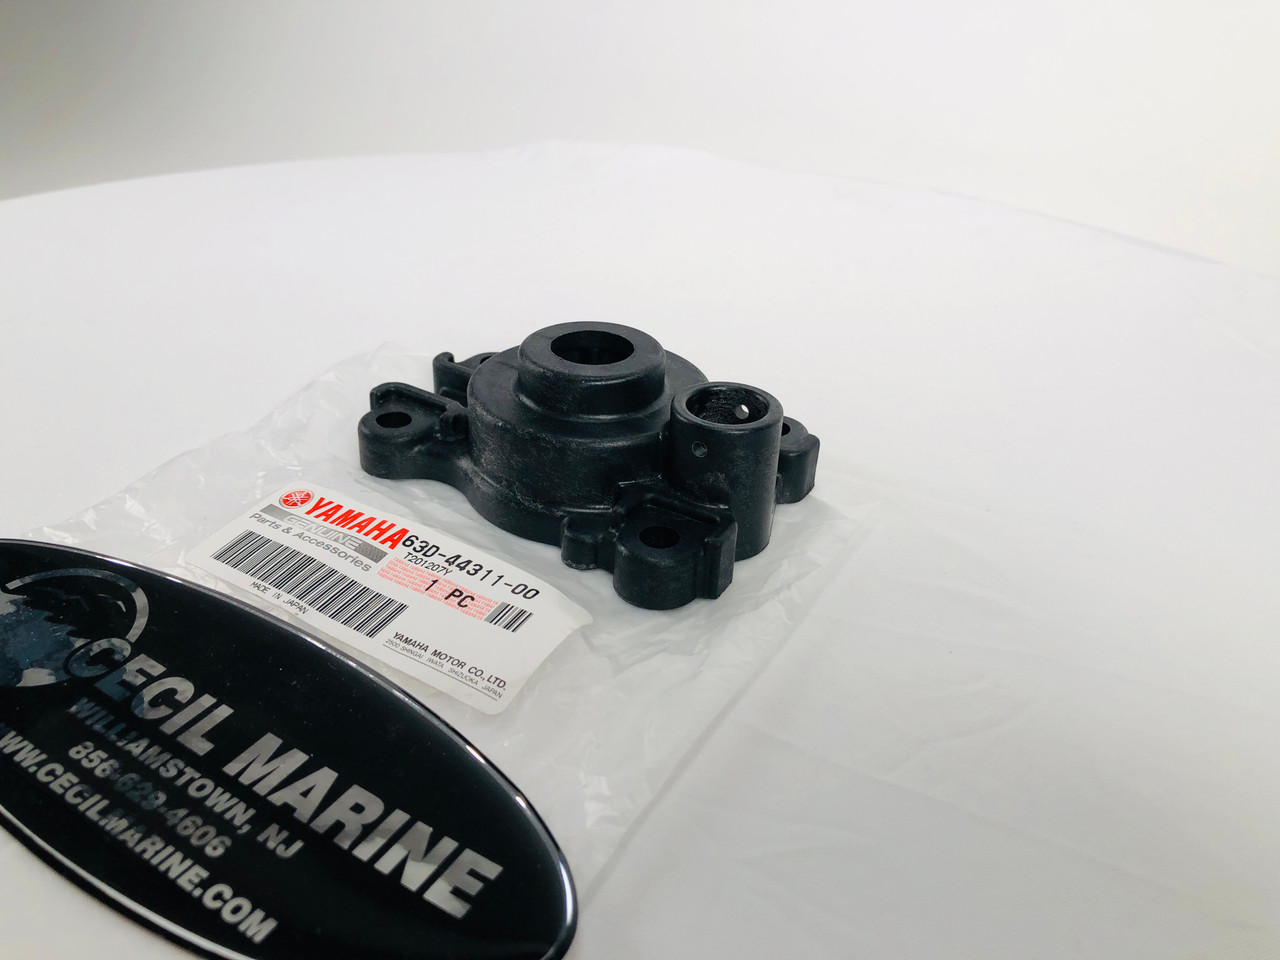 $19.30* GENUINE YAMAHA WATER PUMP HOUSING 63D-44311-00-00 *In stock & ready to ship!